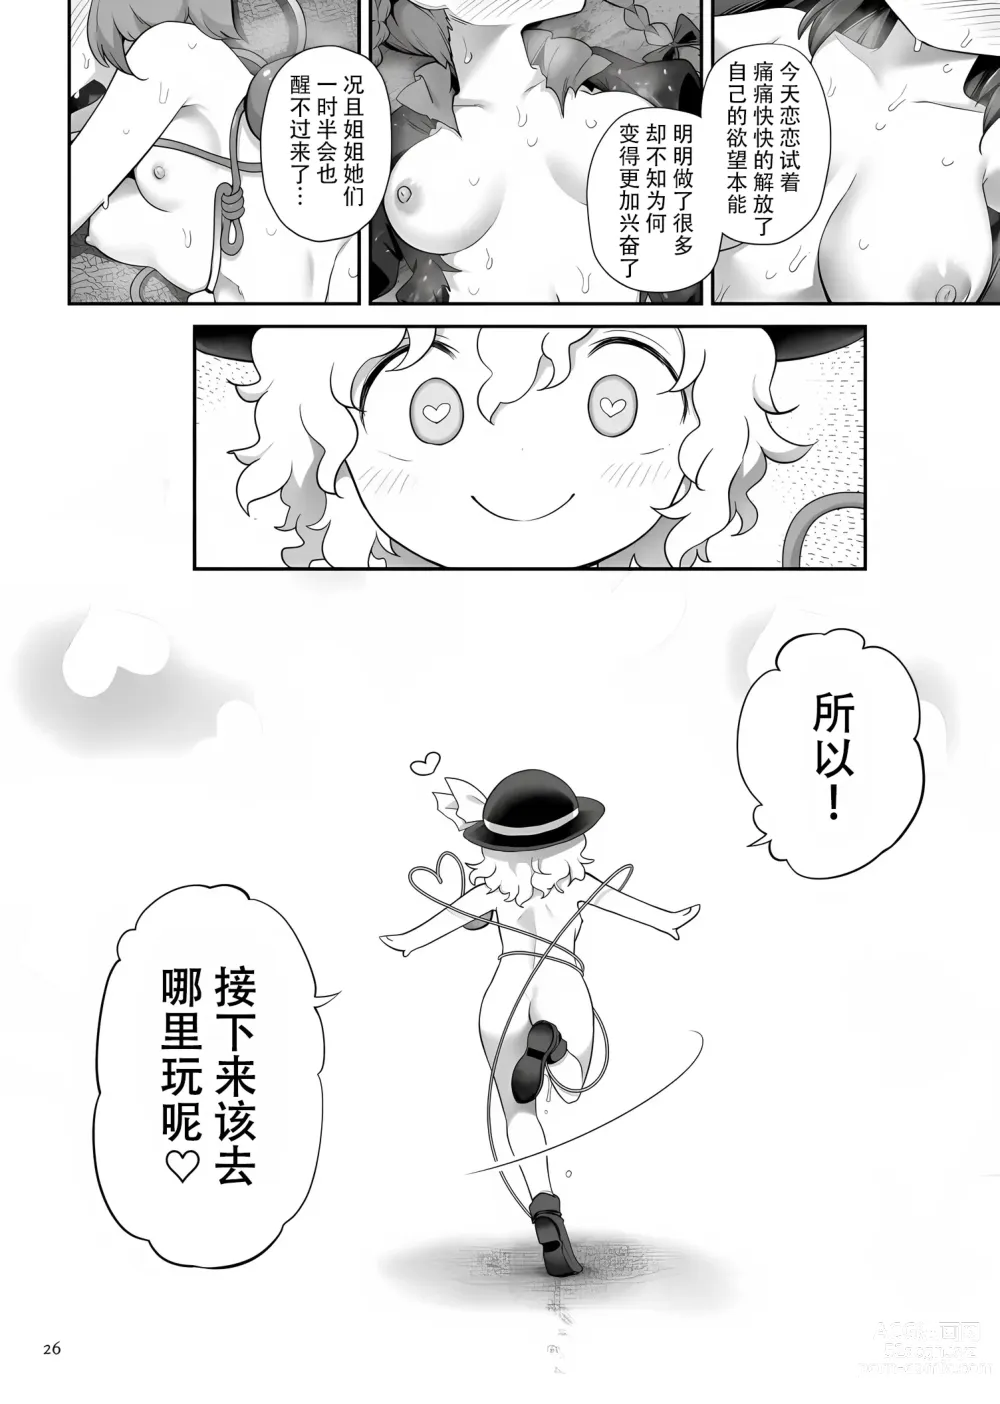 Page 26 of doujinshi [Unmei no Ikasumi (Harusame) Super Id (Touhou Project) [Chinese] [79%汉化组] [Digital]